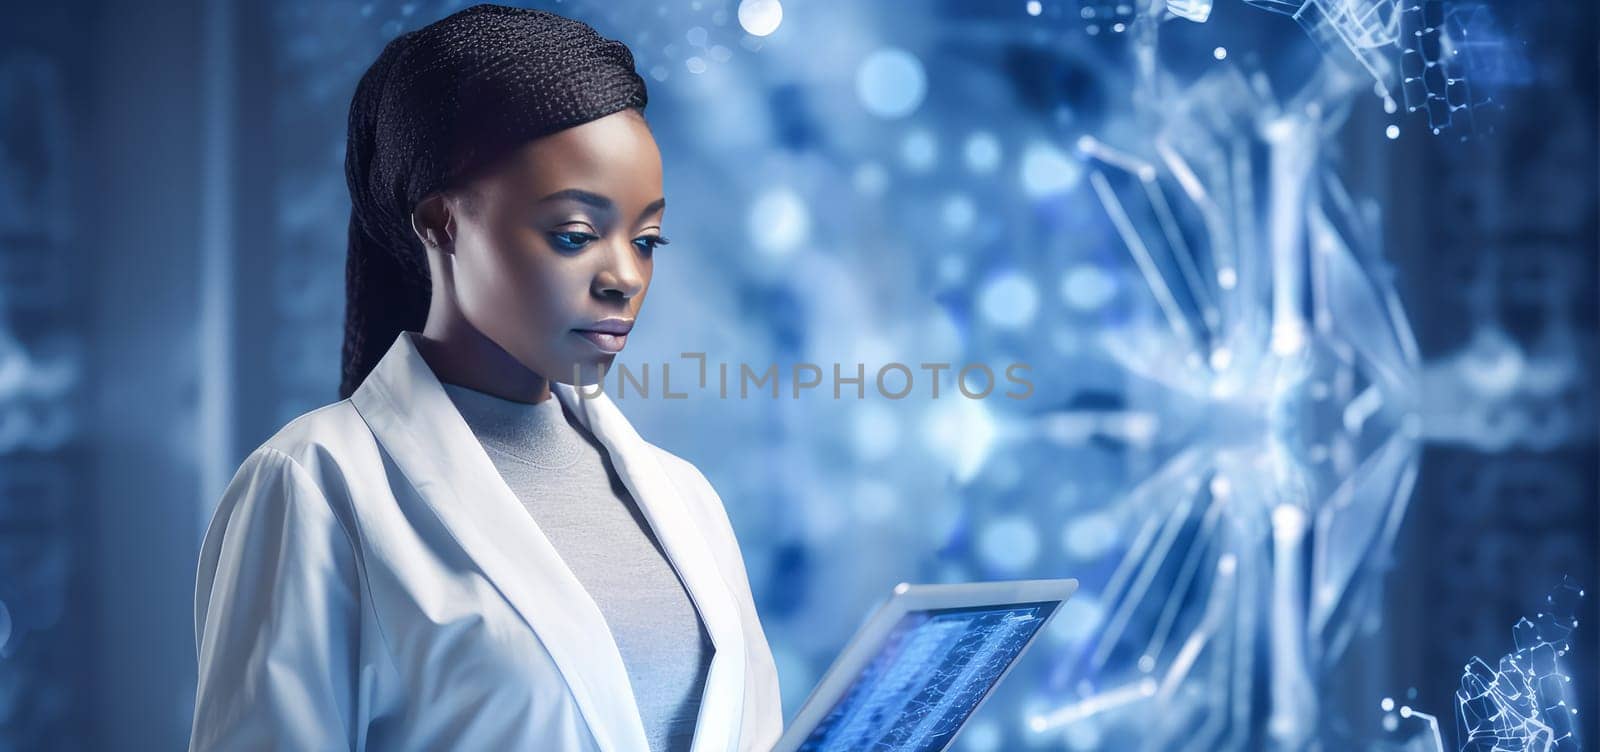 A dark-skinned African American woman in a medical modern bright hospital with modern equipment, where a person undergoes an examination health under insurance. Hospital, medicine, doctor and pharmaceutical company, healthcare and health insurance.